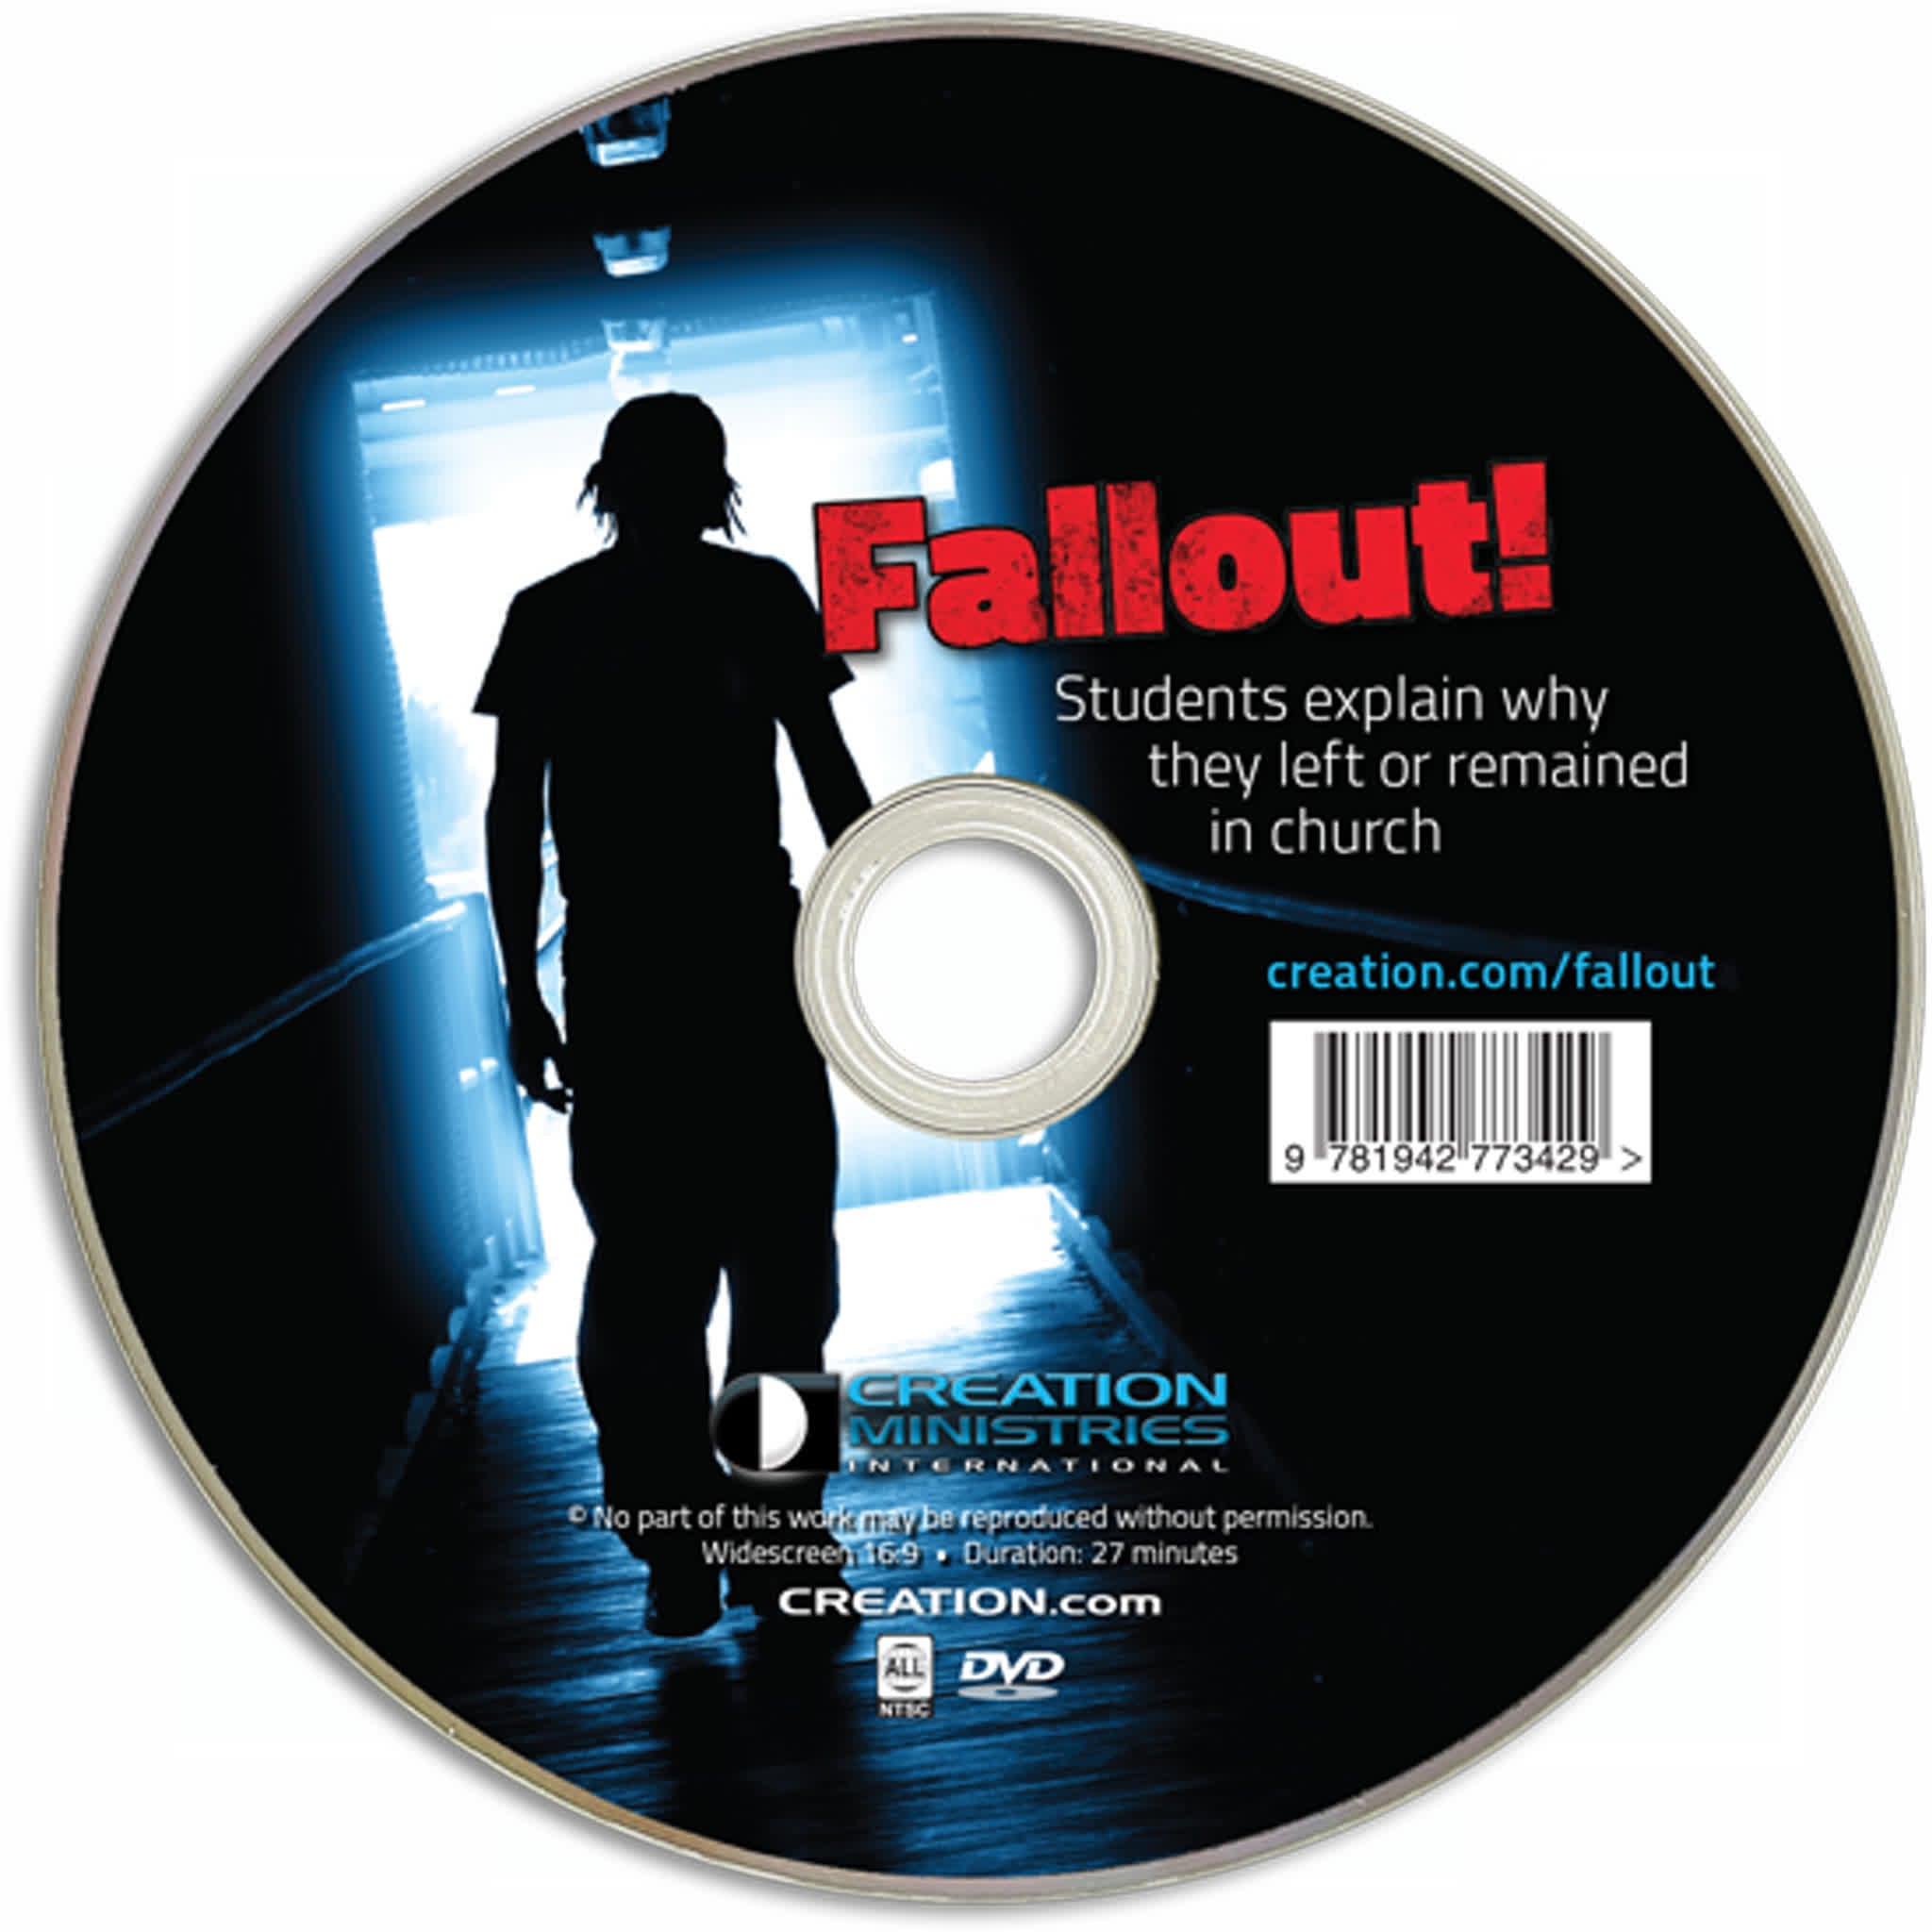 Fallout DVD: Students Explain Why They Left or Remained in Church